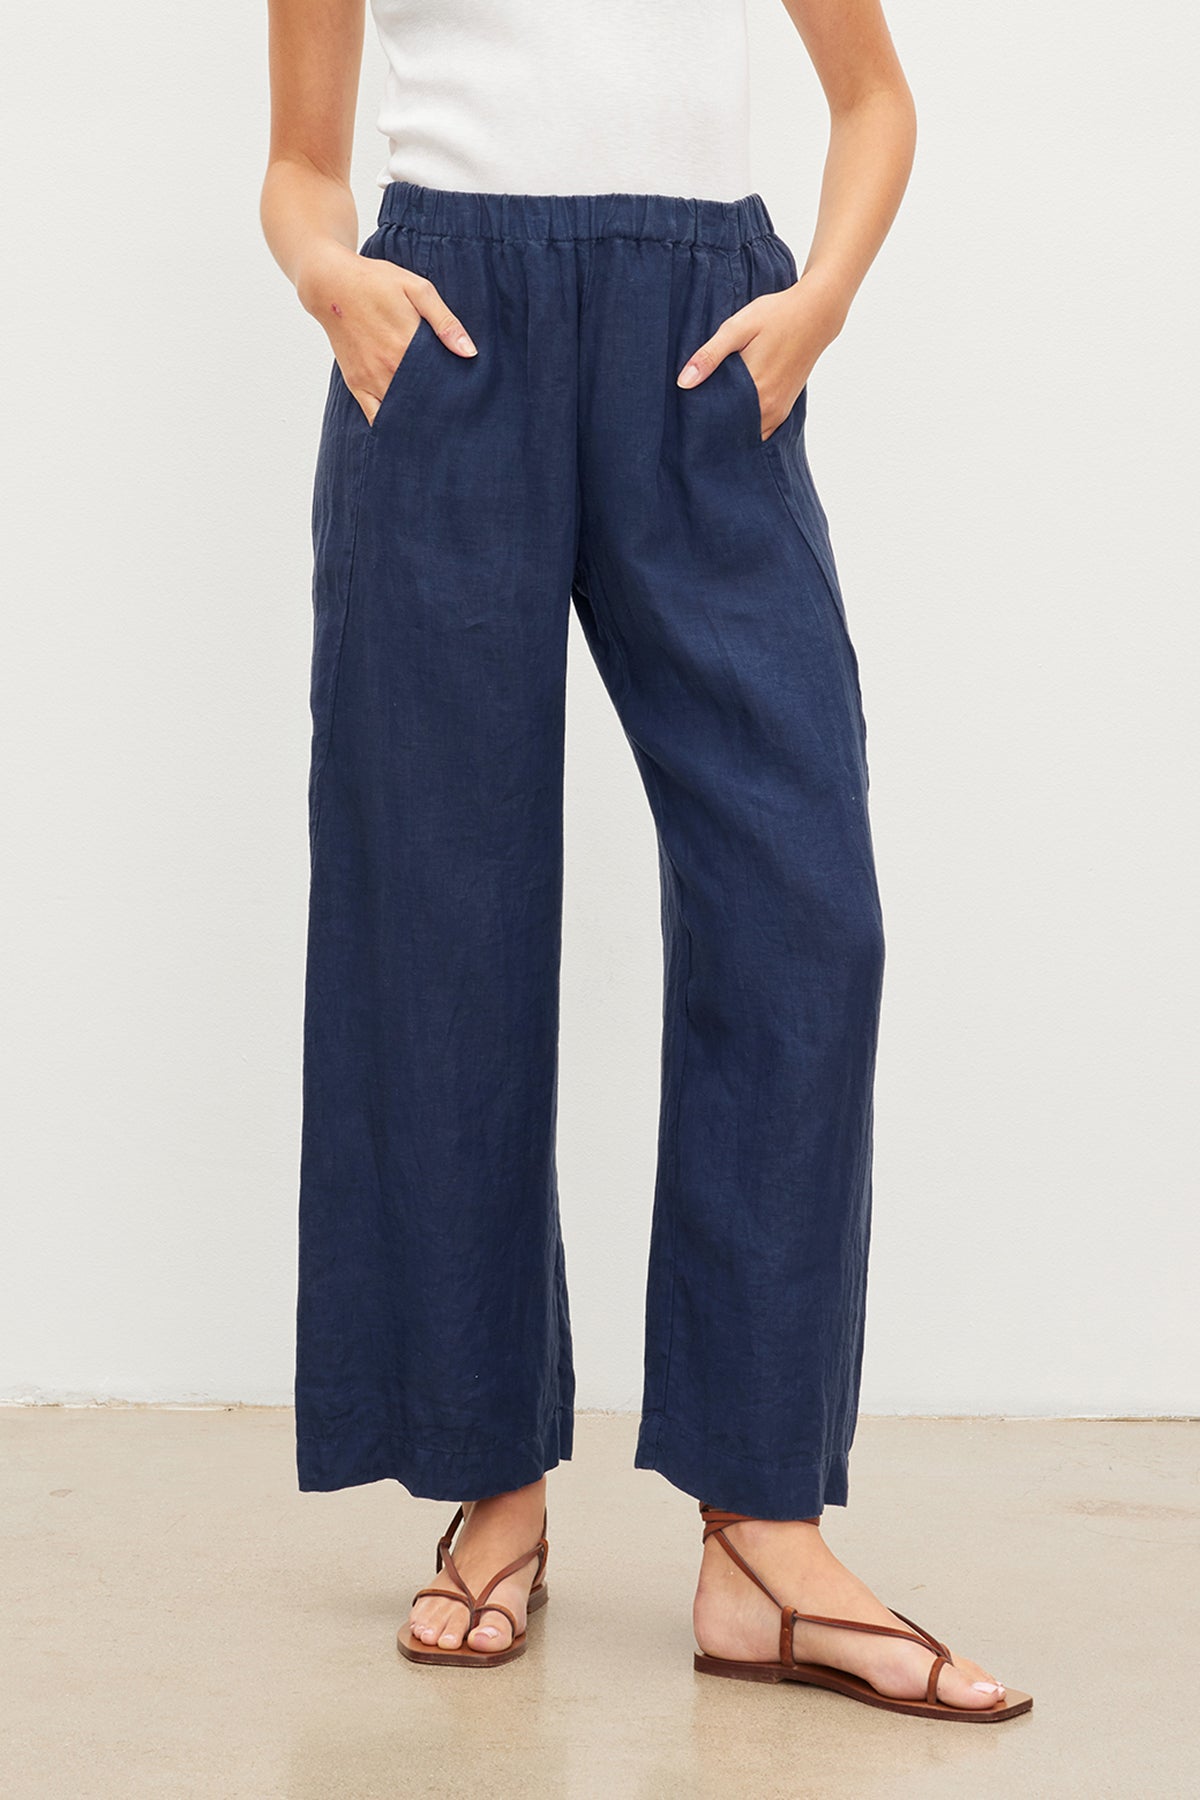 A person wearing a white top and navy blue LOLA LINEN PANT by Velvet by Graham & Spencer with hands in pockets. The individual also sports brown sandals and stands on a light-colored floor against a white wall.-36581057790145